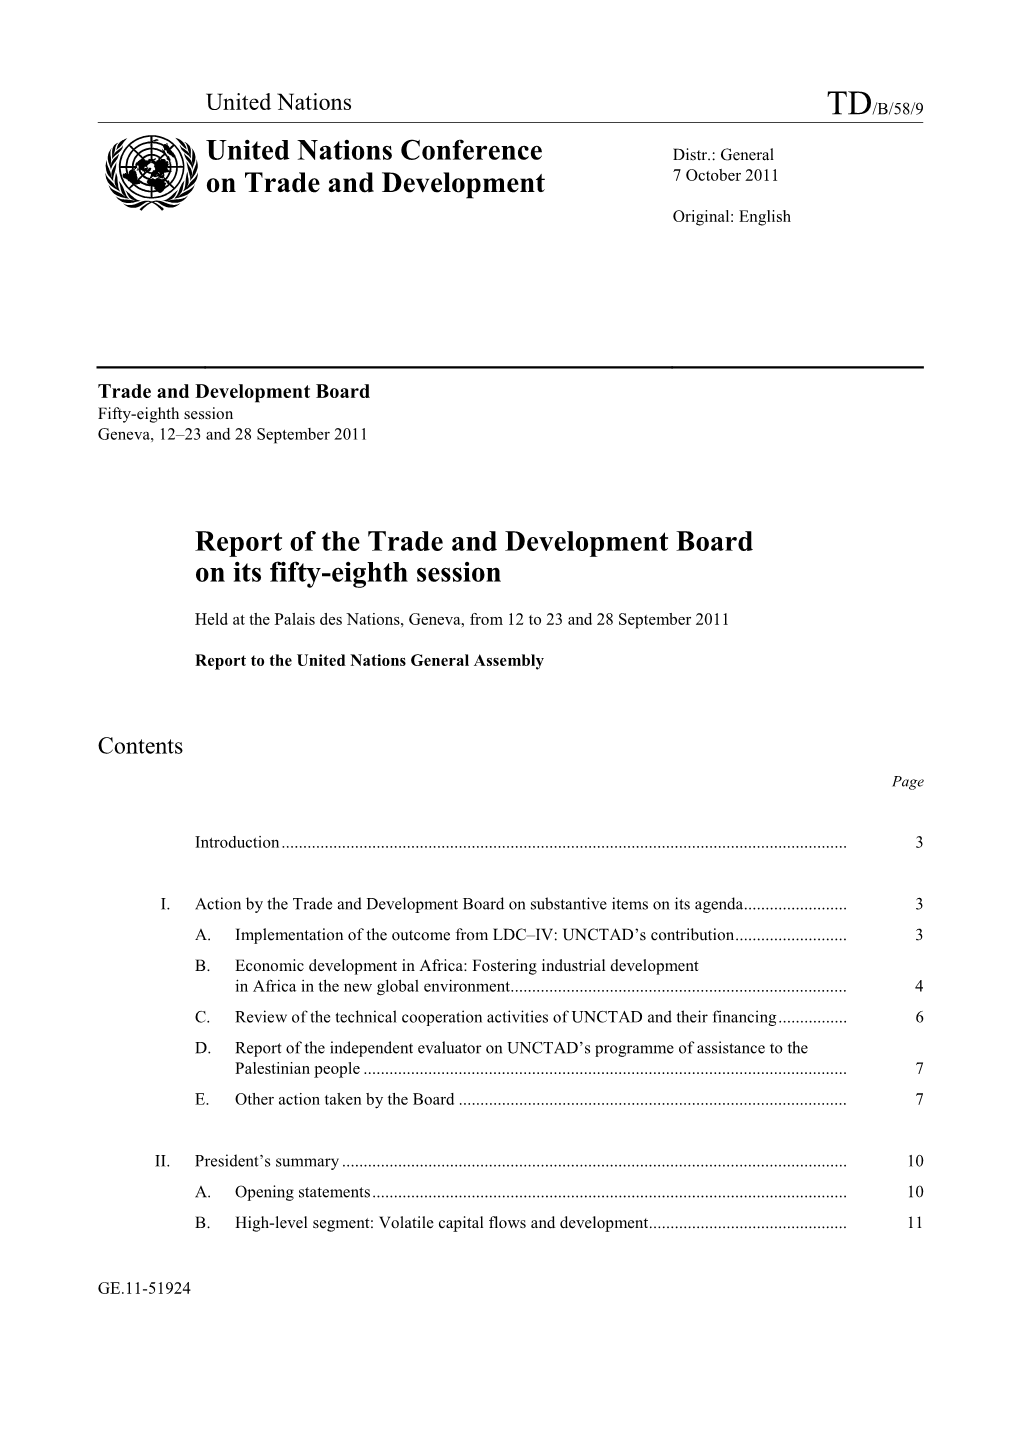 Report of the Trade and Development Board on Its Fifty-Eighth Session